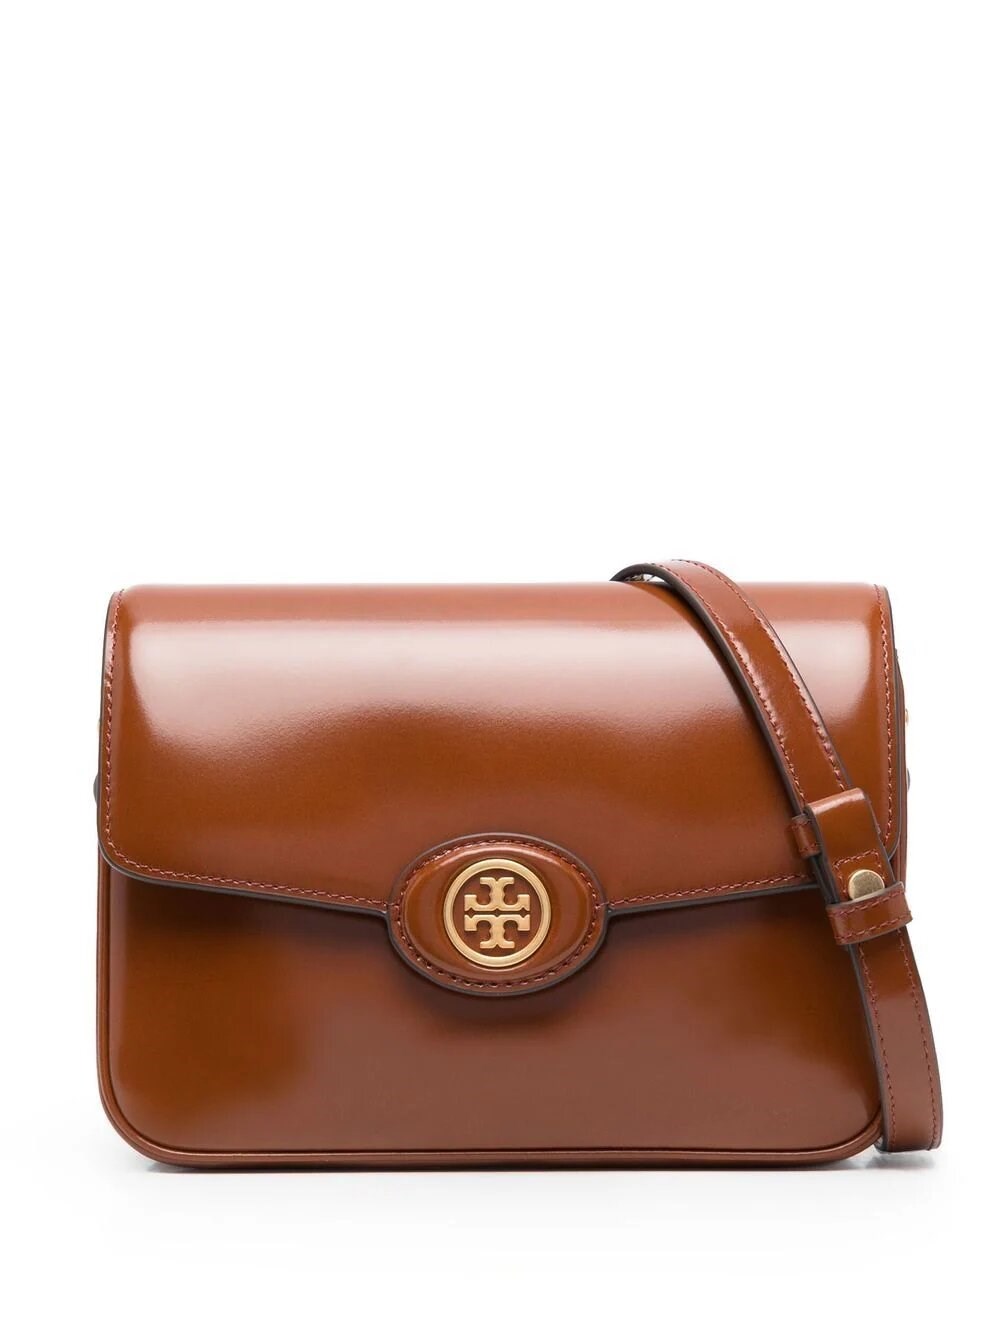 Tory Burch Robinson Convertible Shoulder Strap In Brown